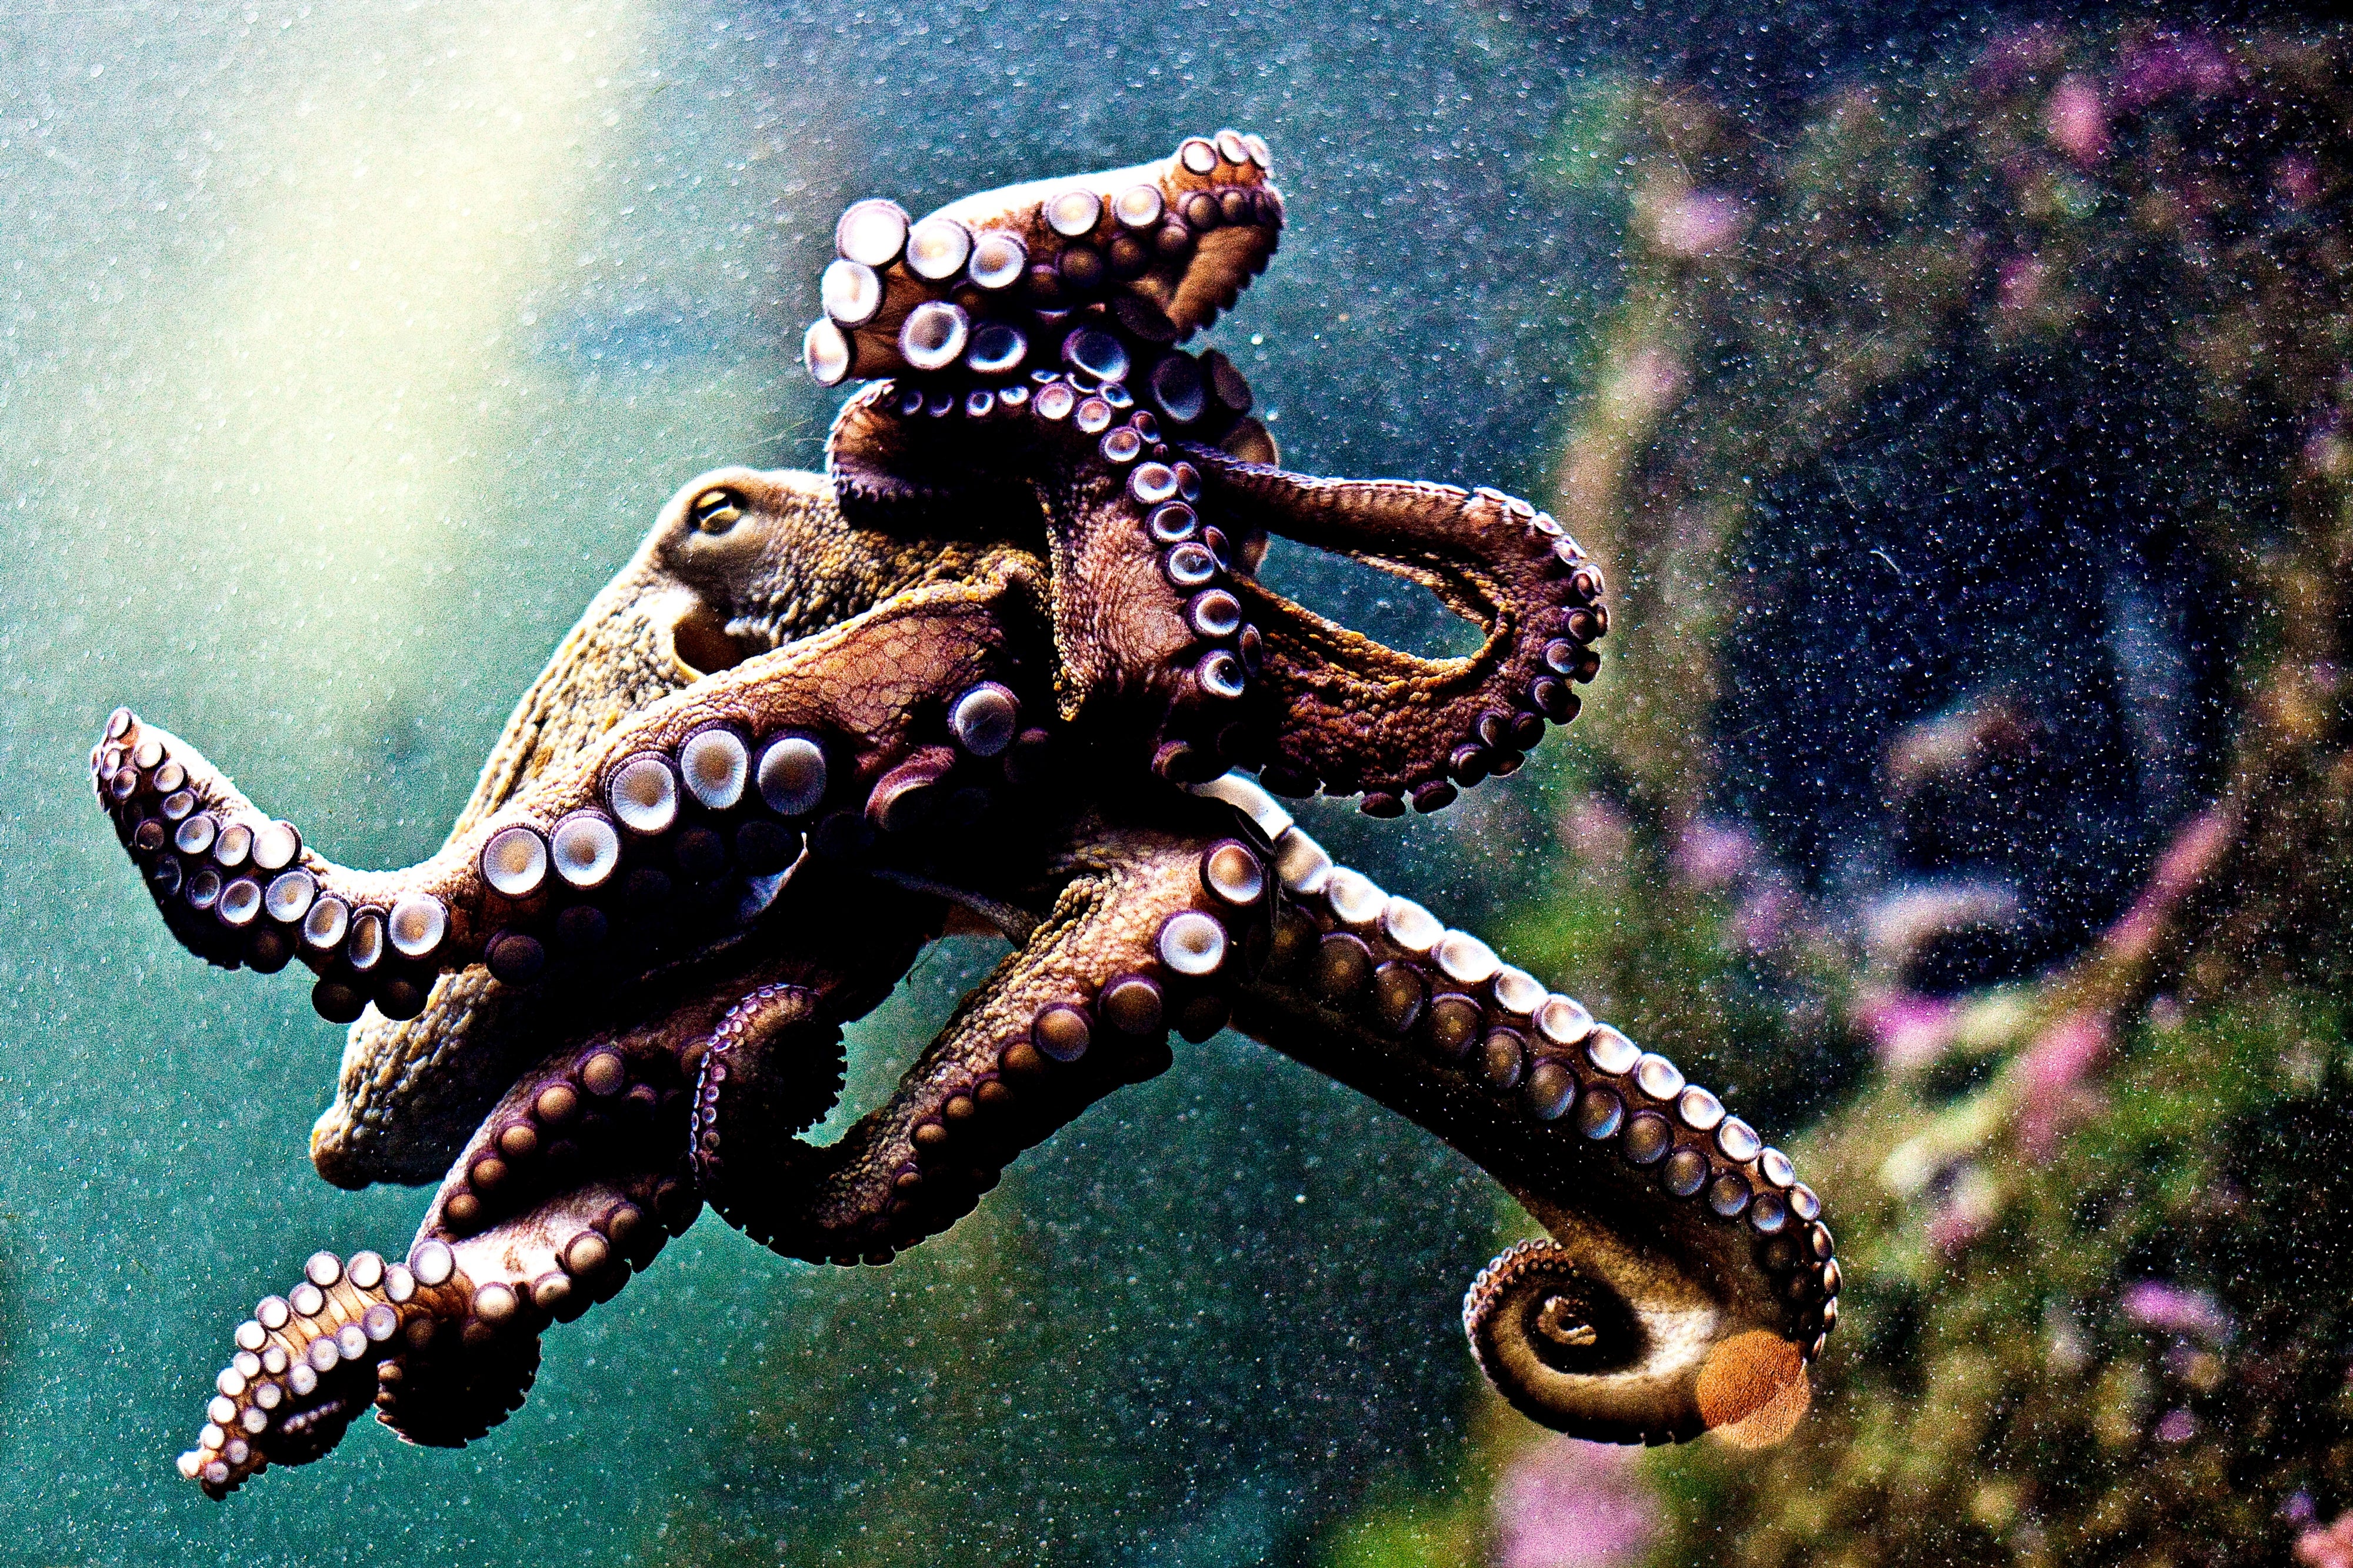 how long does an octopus live